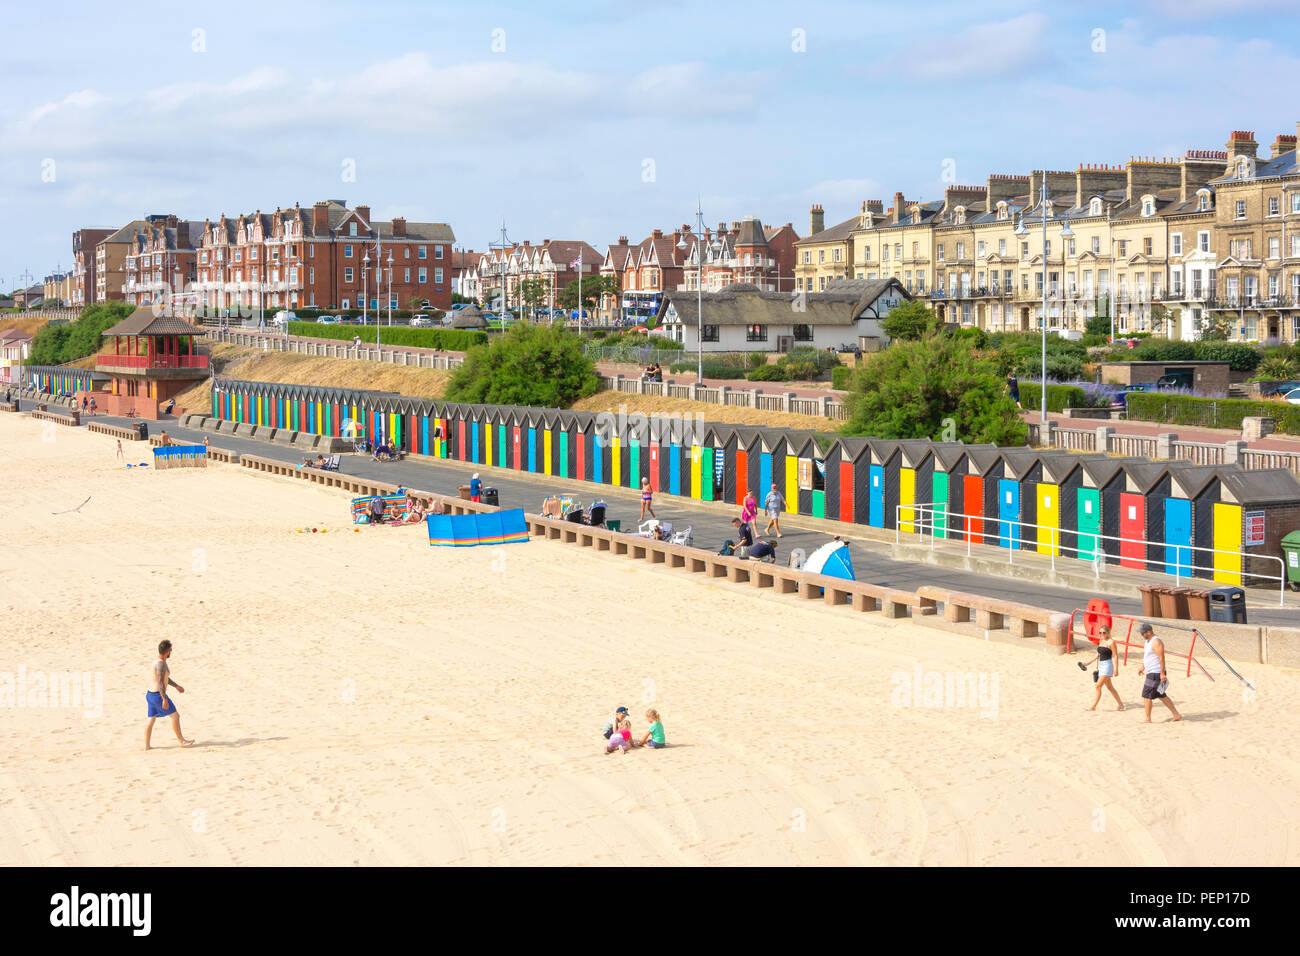 Lowestoft Beach and colourful beach huts from pier, Lowestoft, Suffolk, England, United Kingdom Stock Photo